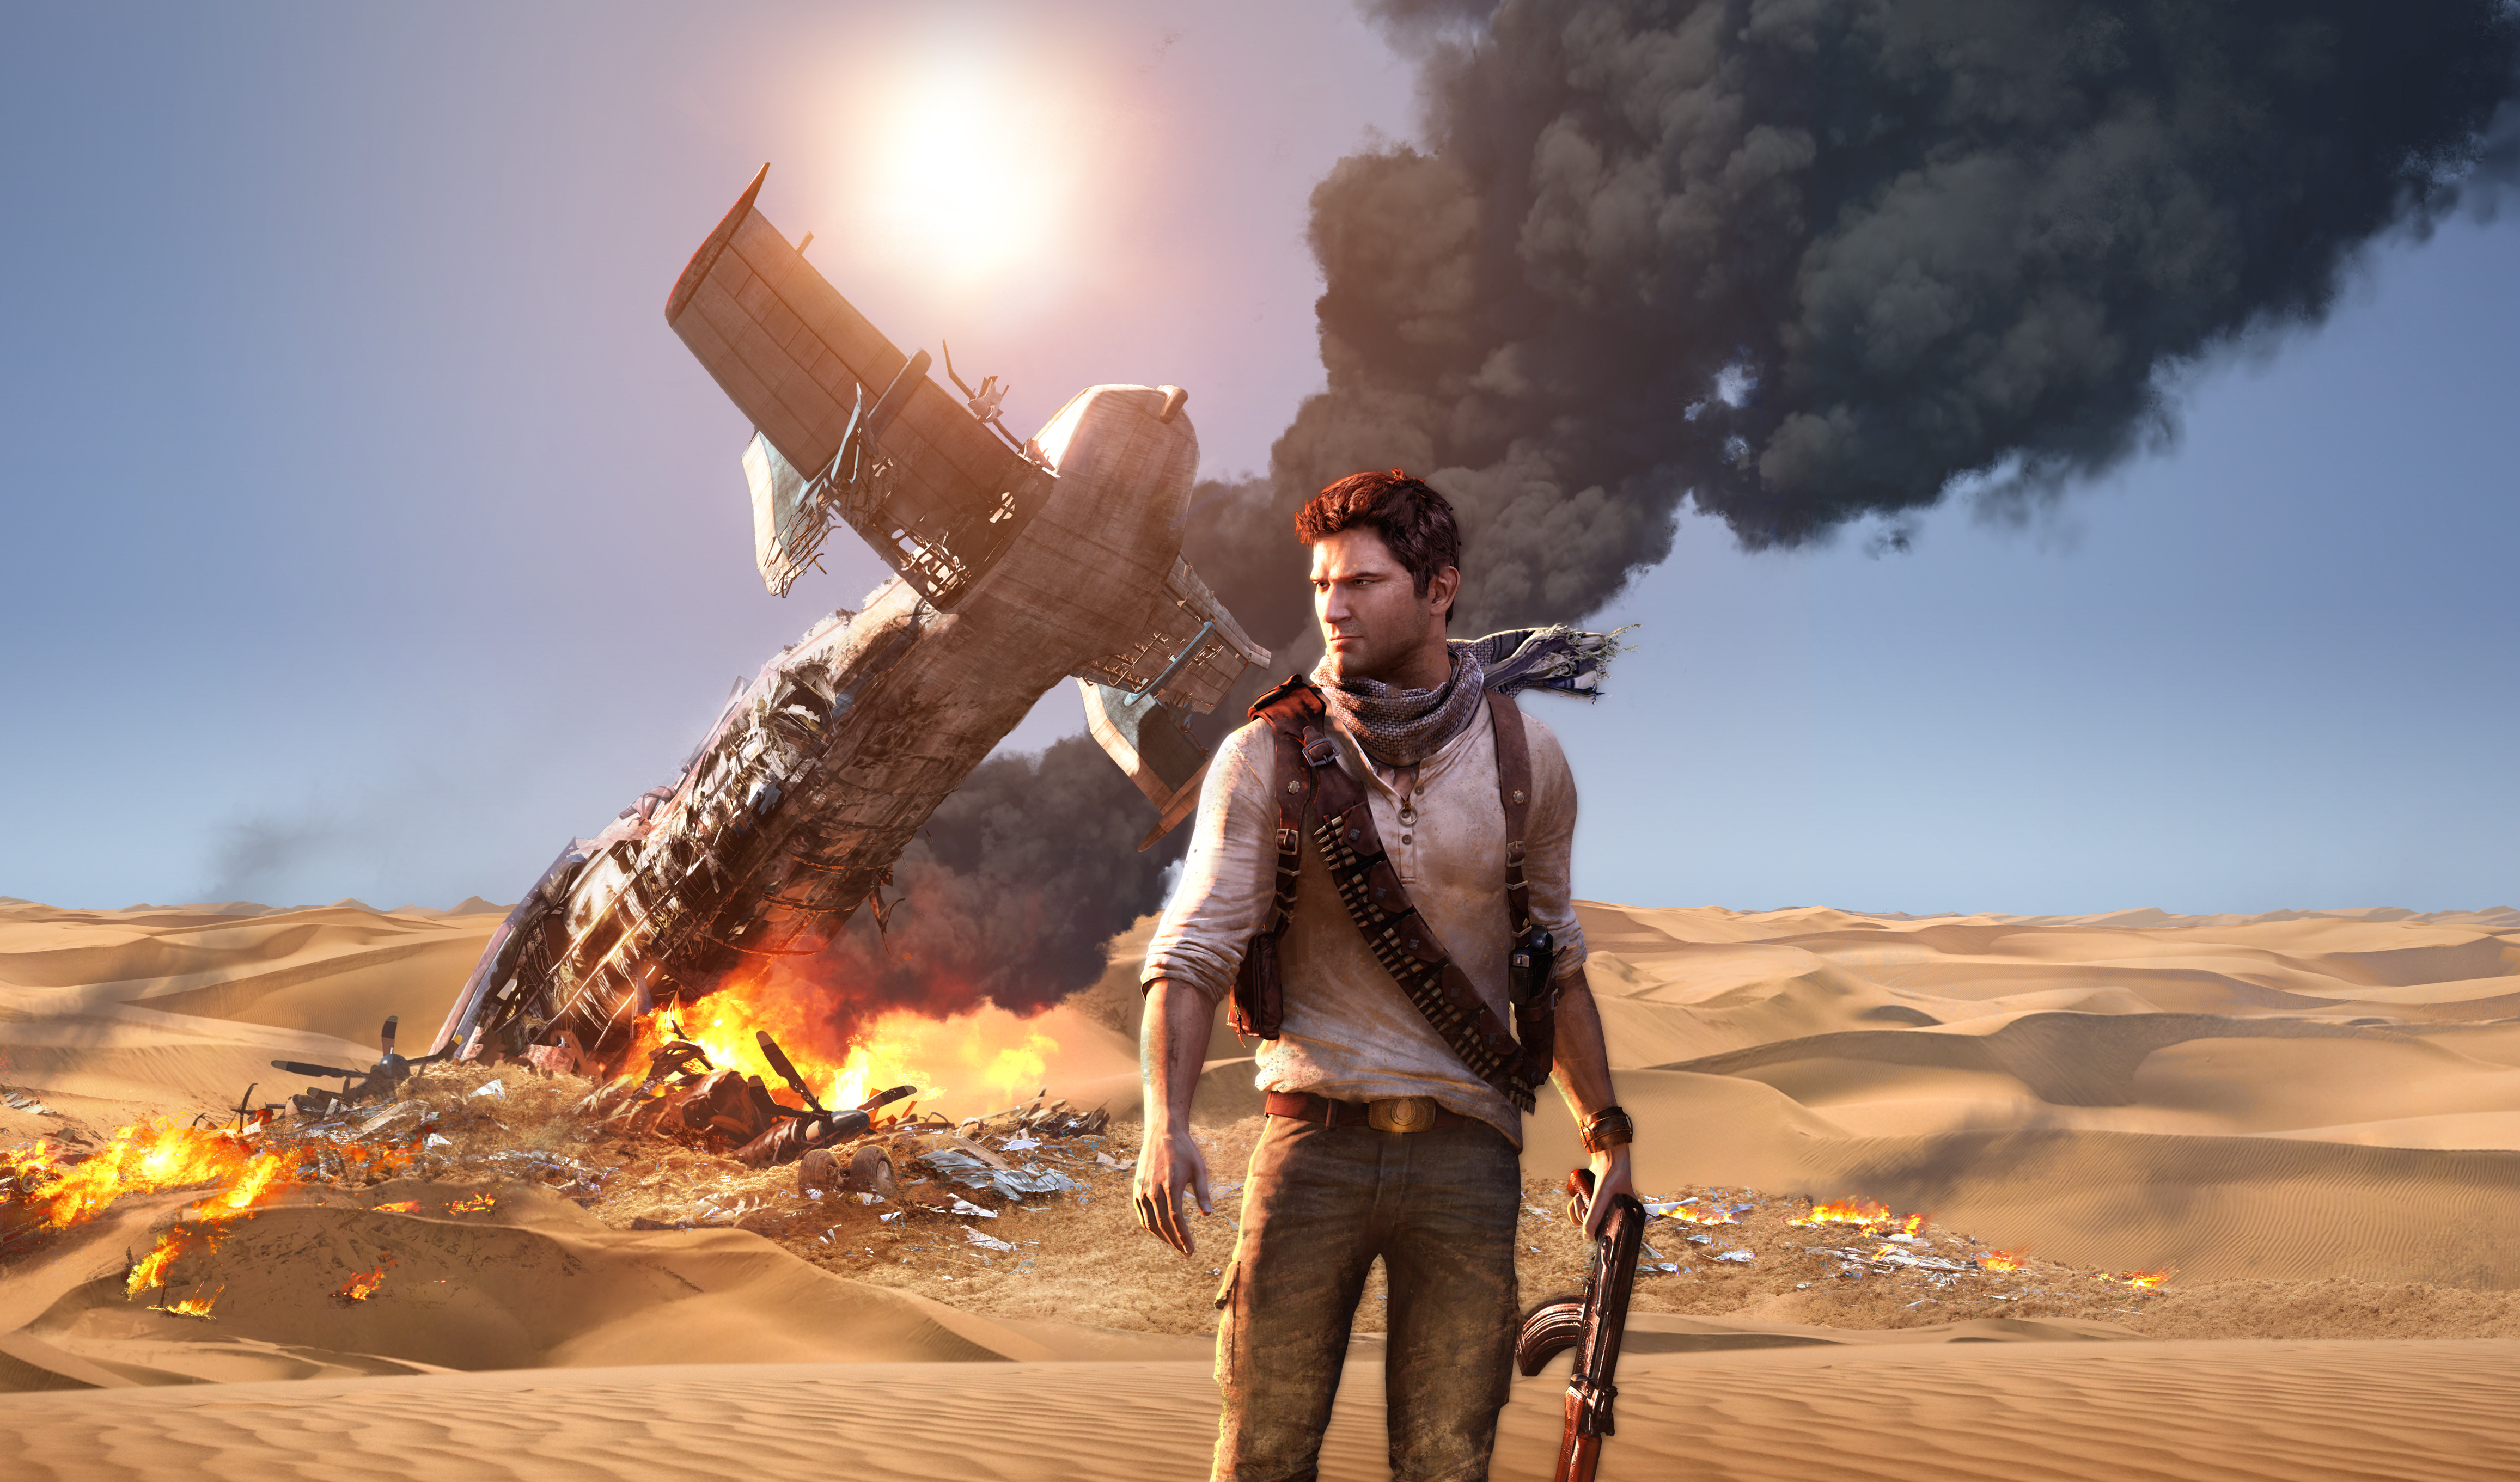 Free photo A downed airplane in the desert in the game uncharted 4